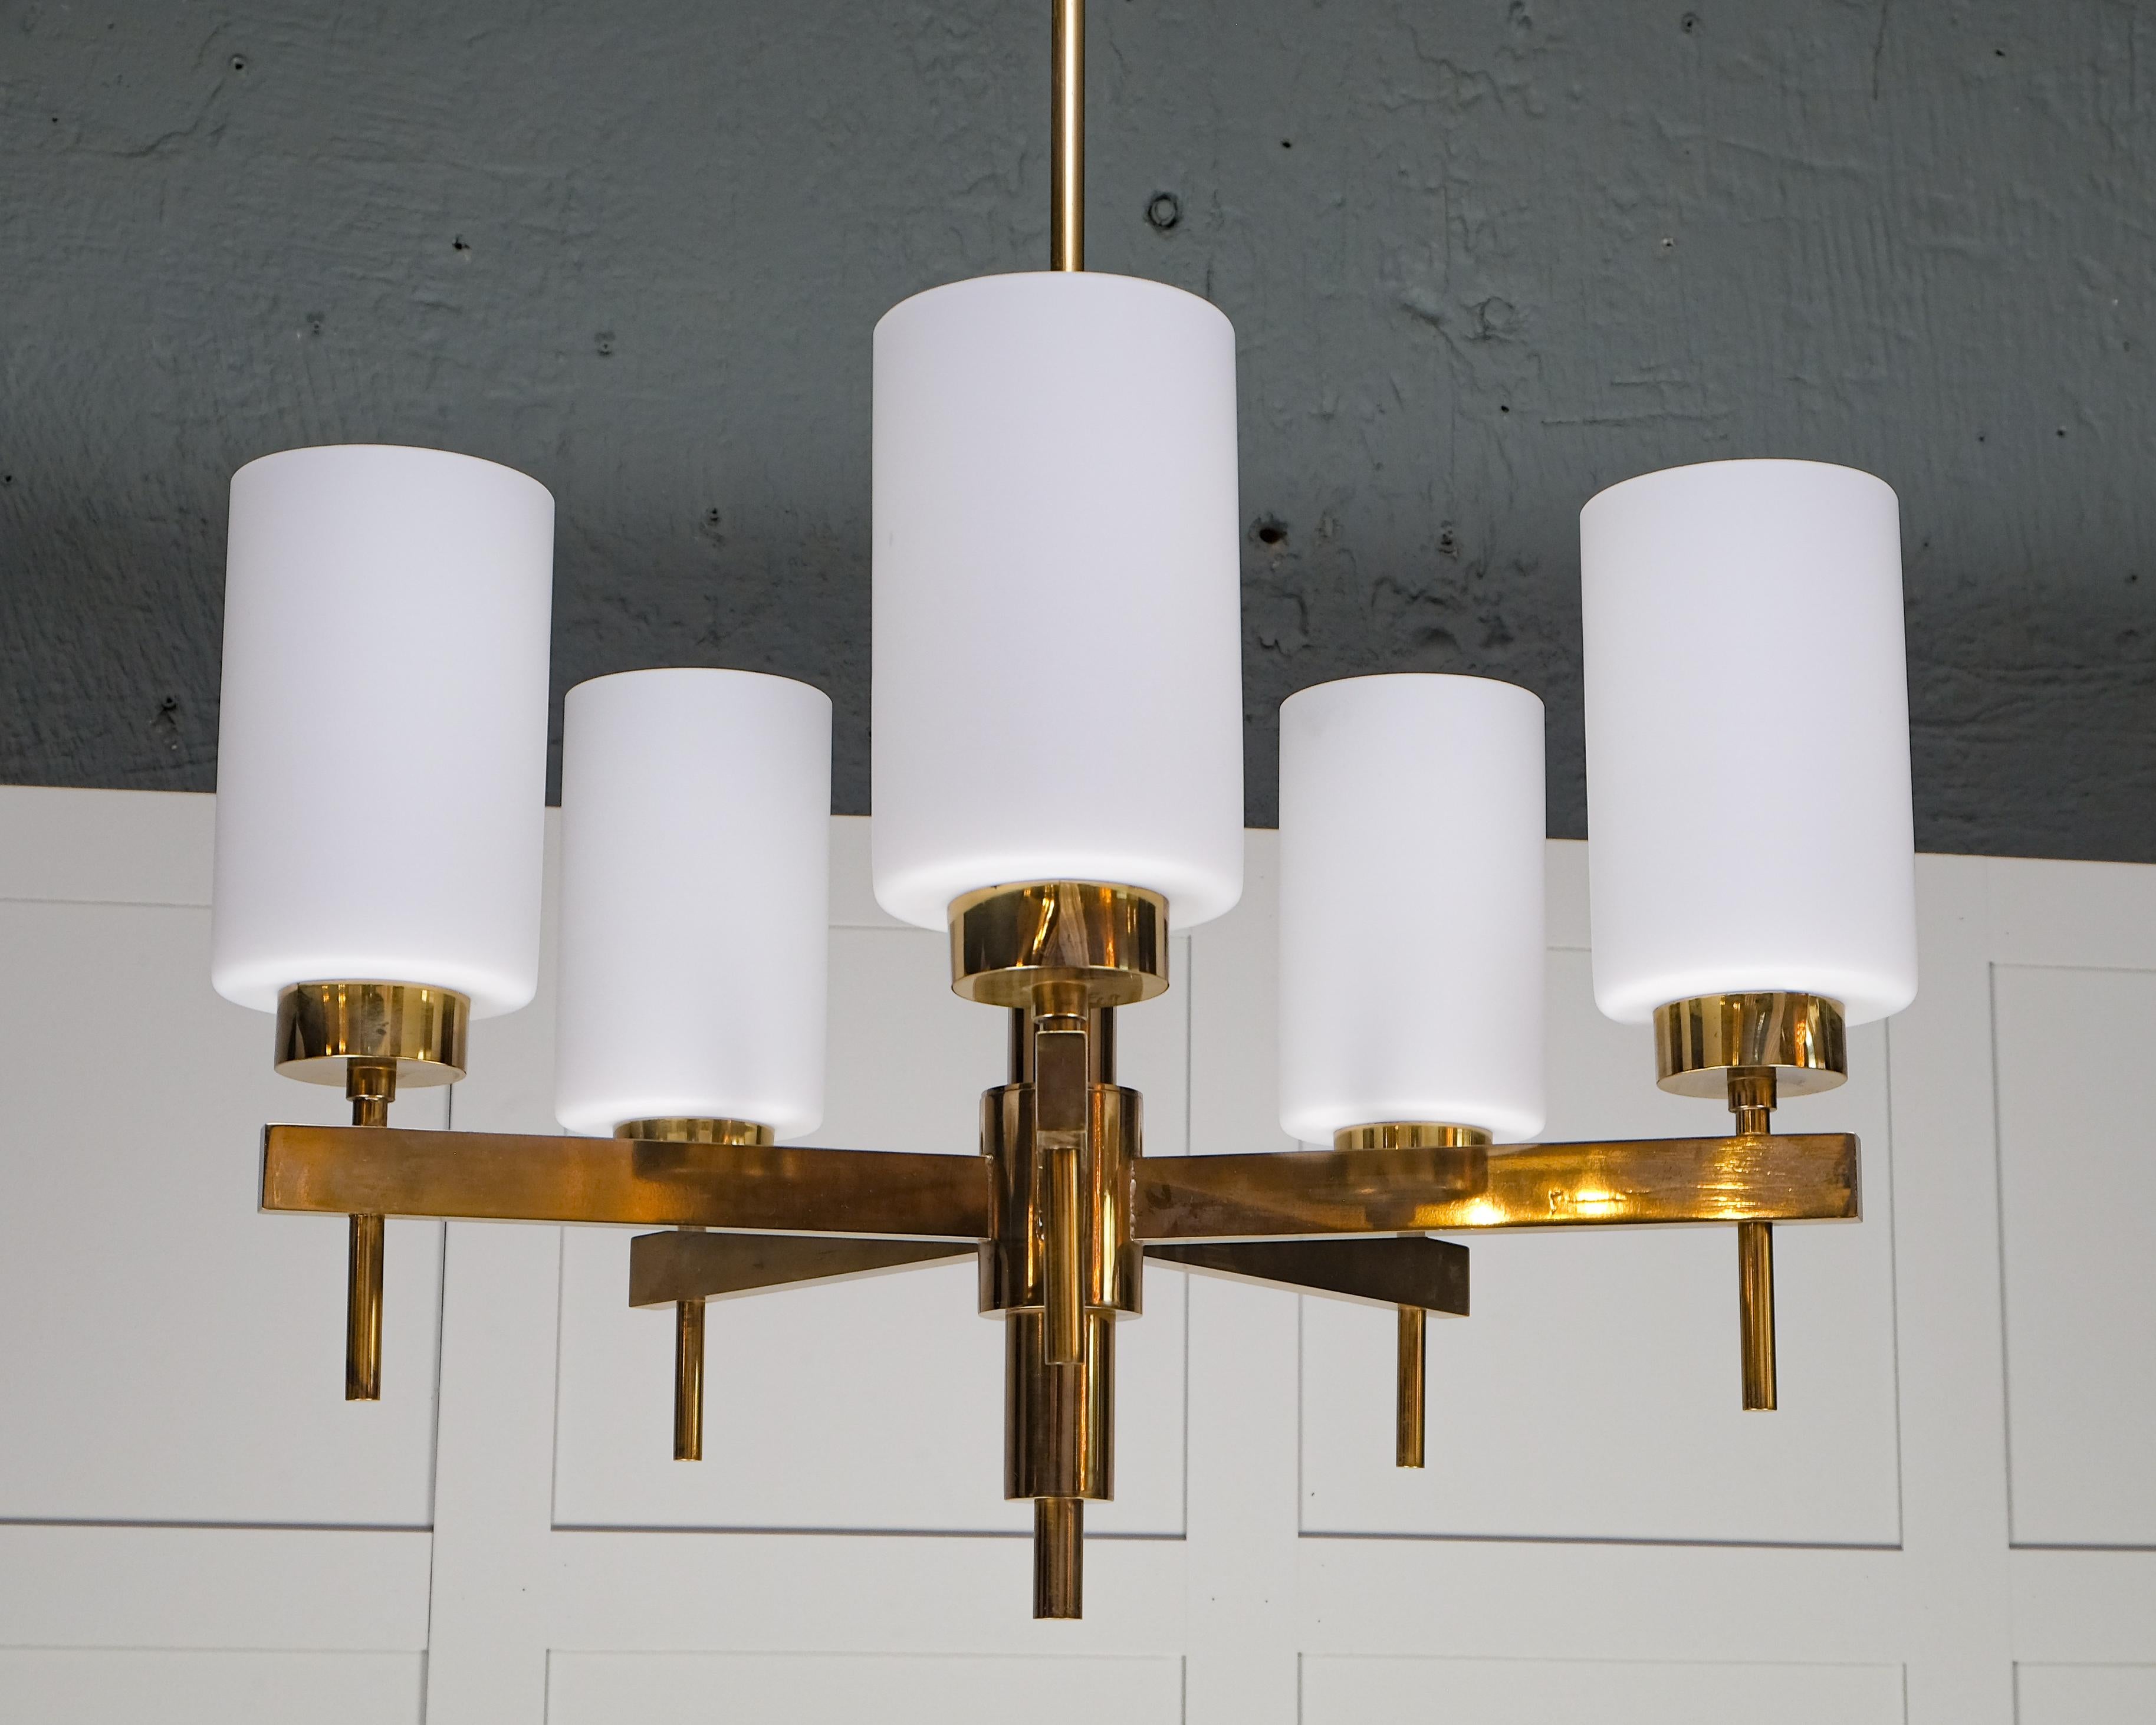 Set of 4 Hans-Agne Jakobsson Brass Chandeliers, 1960s In Good Condition For Sale In Stockholm, SE